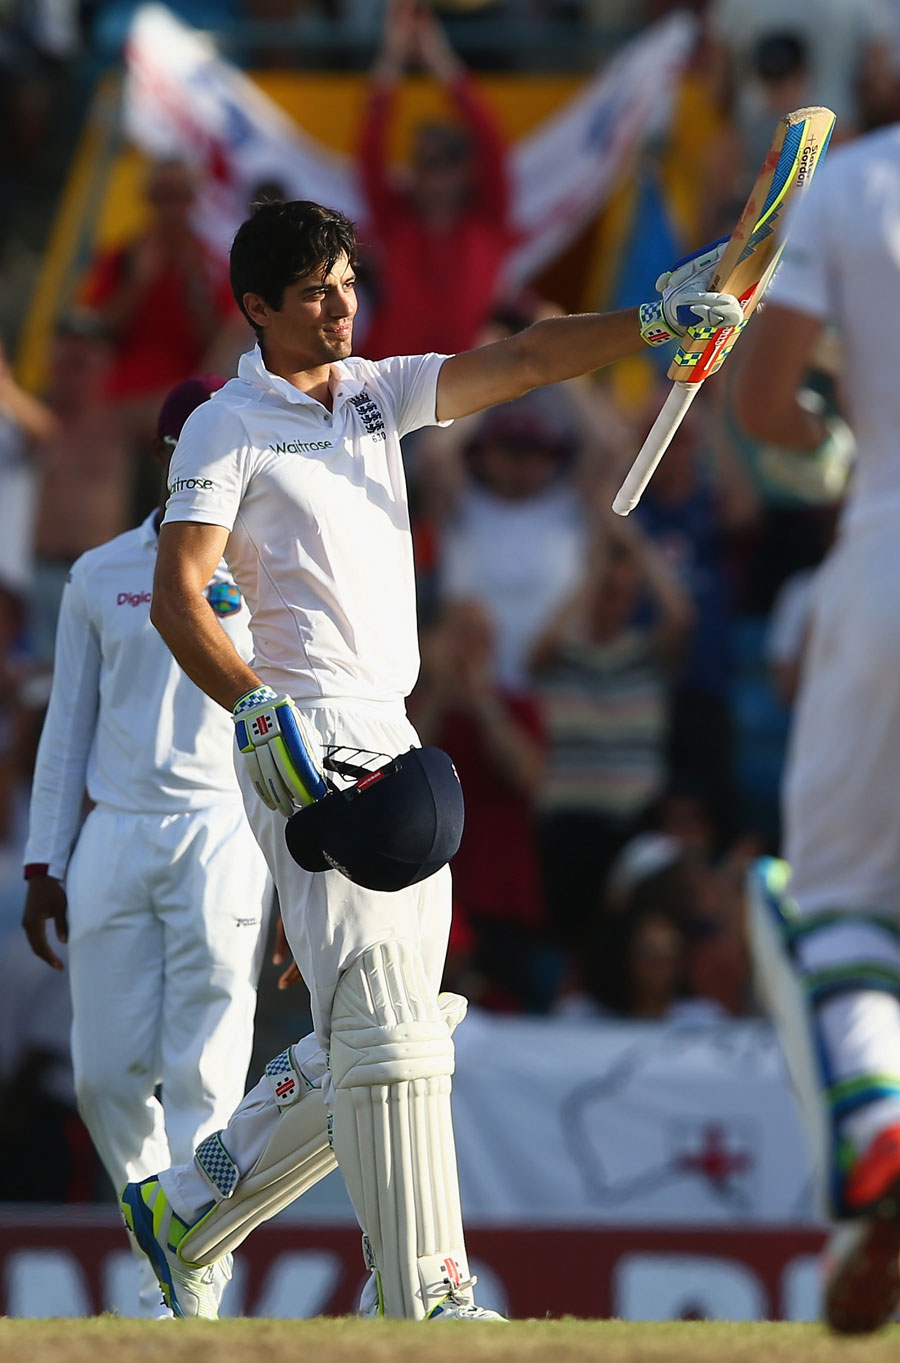 Alastair Cook celebrates his 26th Test hundred on the 1st day of 3rd Test between West Indies and England at Bridgetown on Friday.